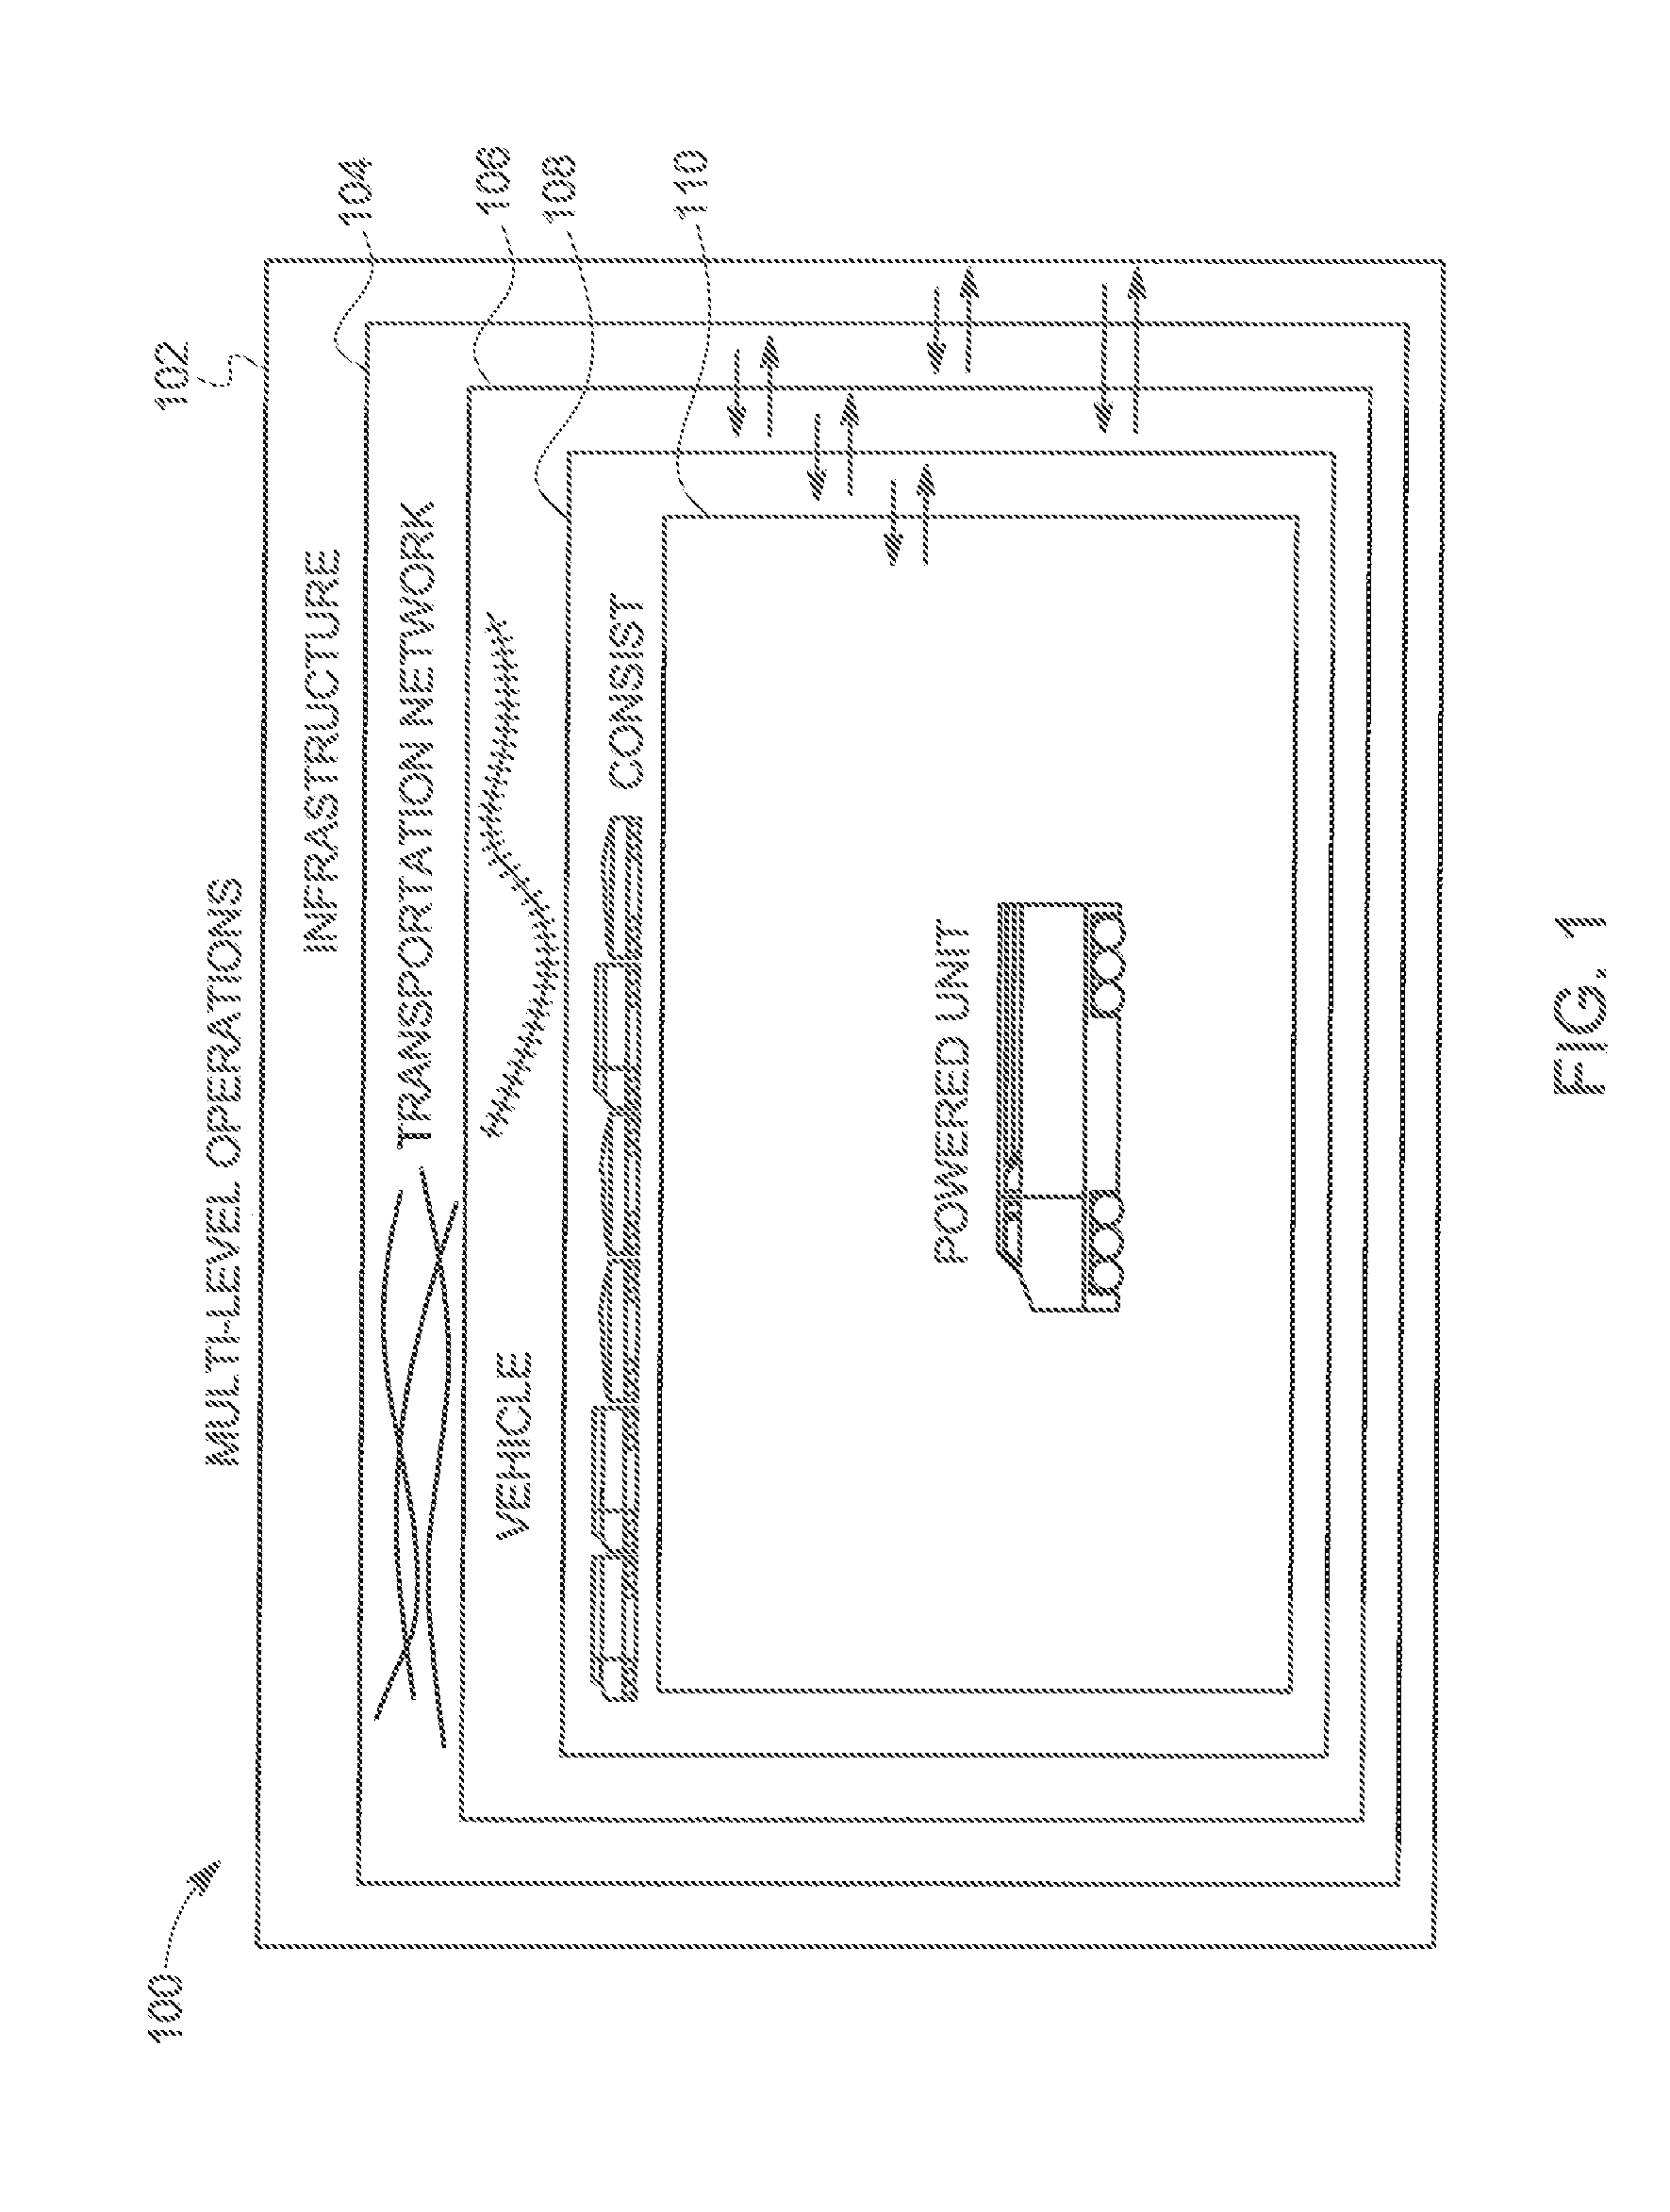 System and method for vehicle control